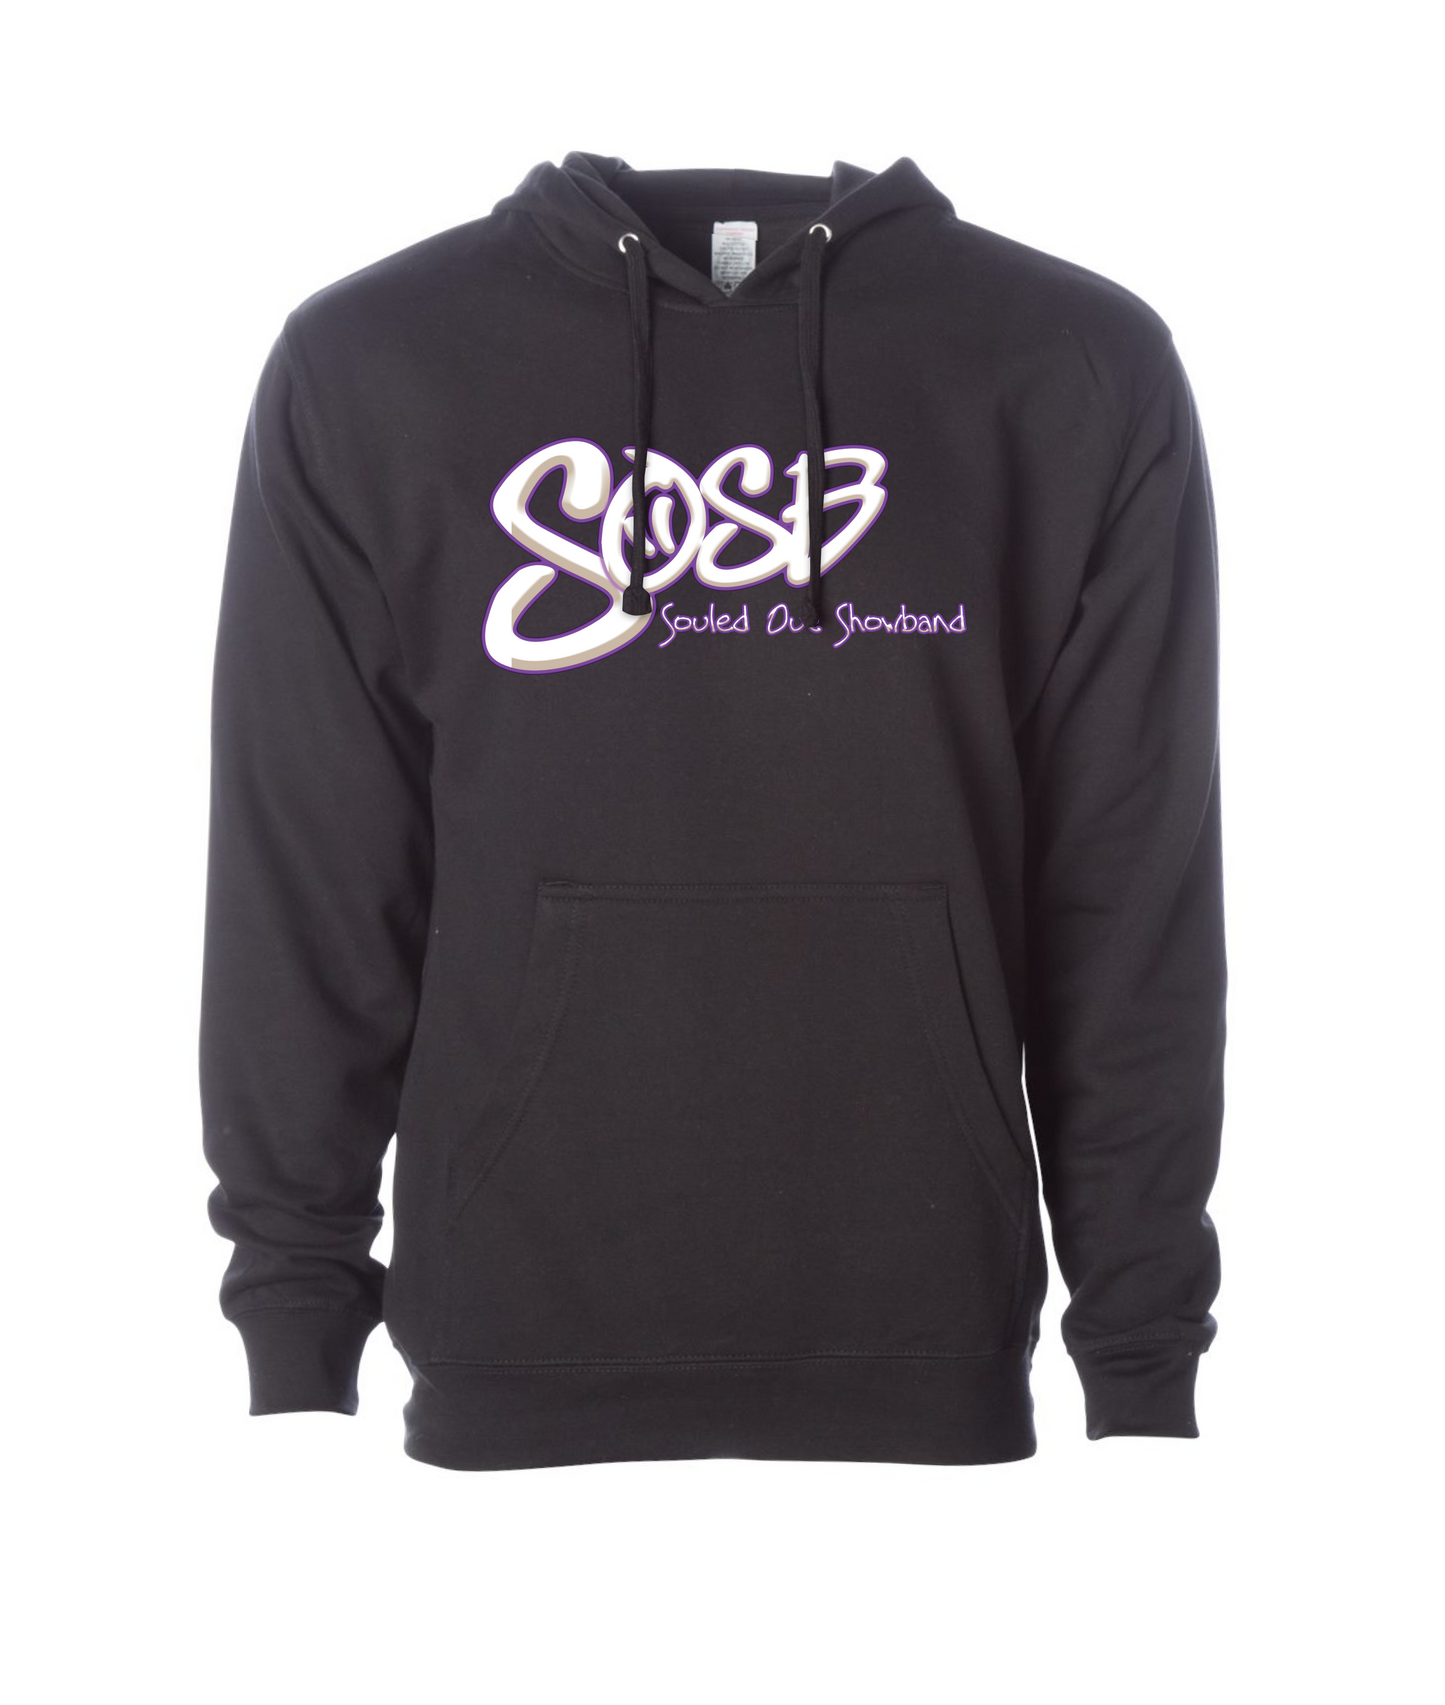 Souled Out Show Band - SOSB Lettering - Black Hoodie